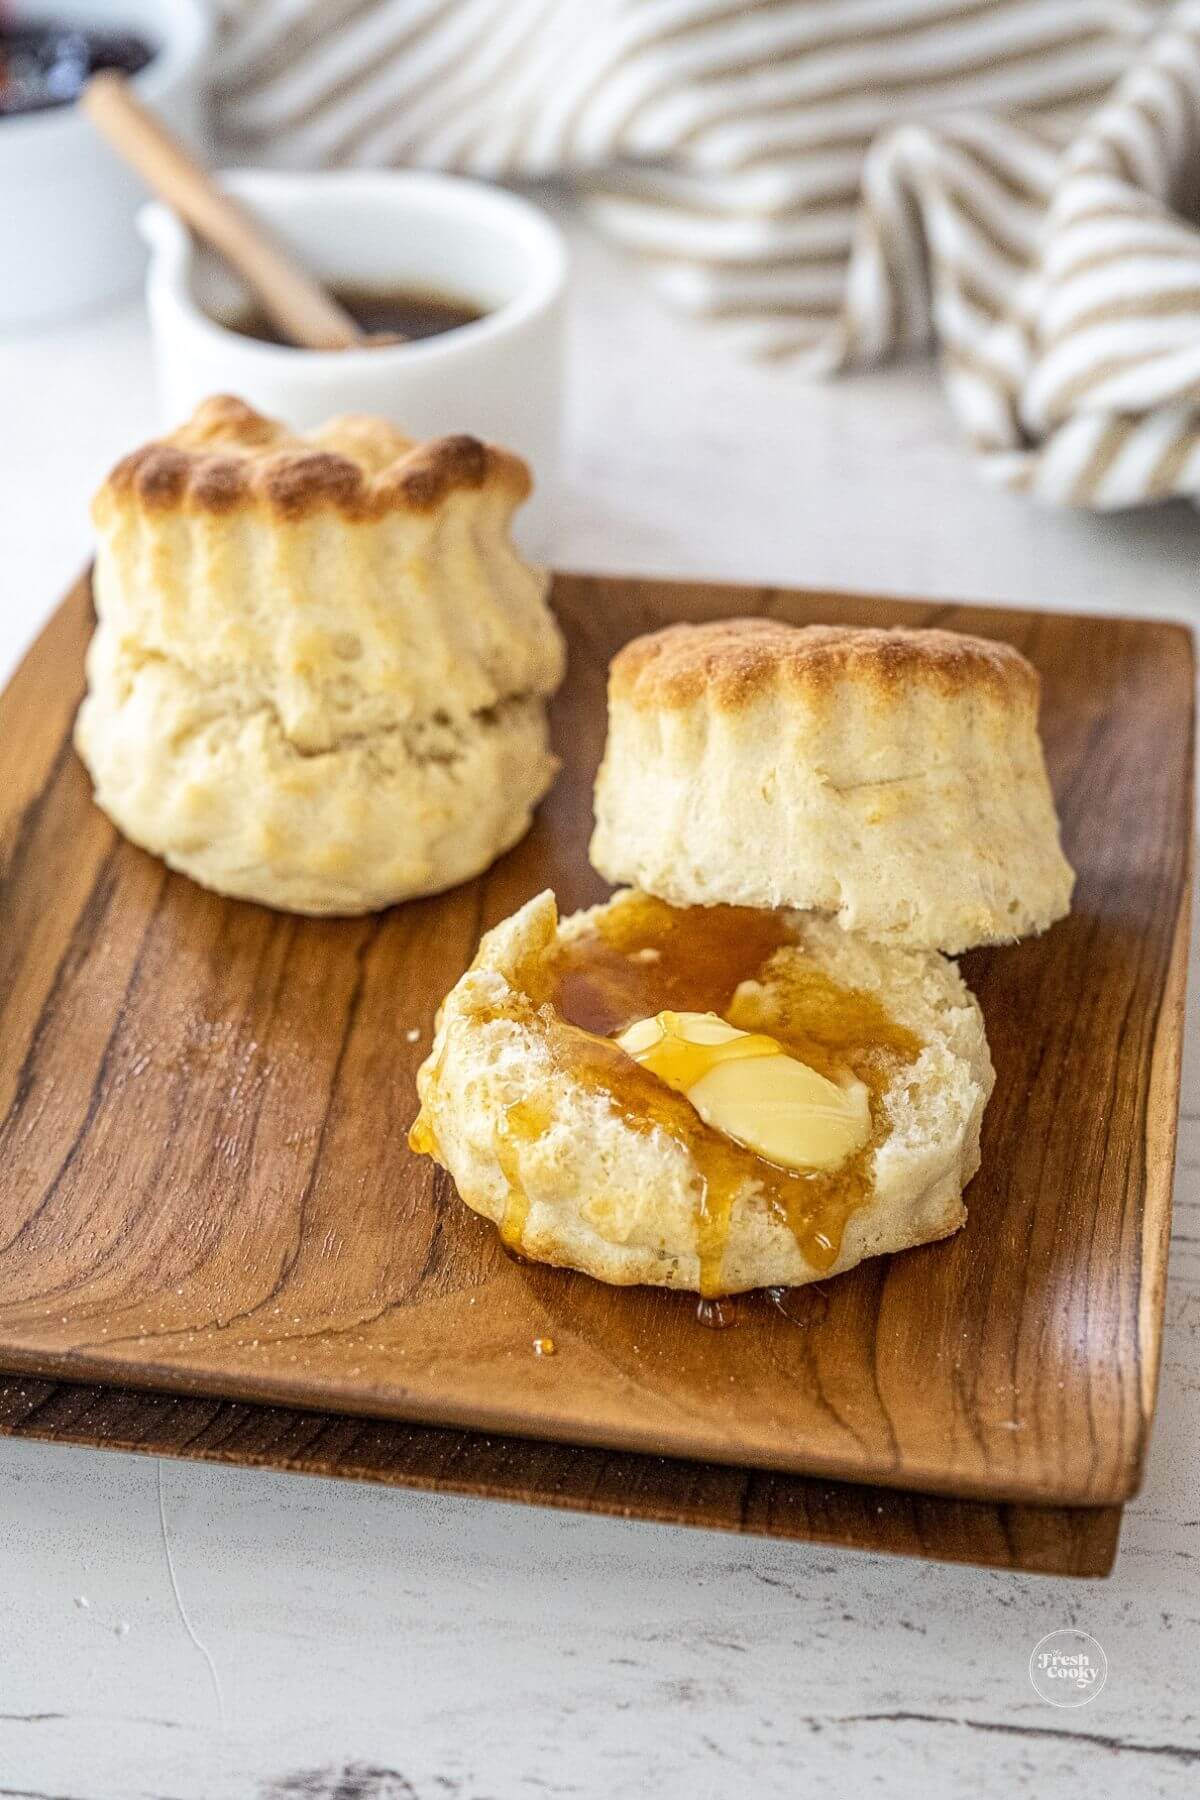 Biscuits on wooden plates, with butter and some honey.